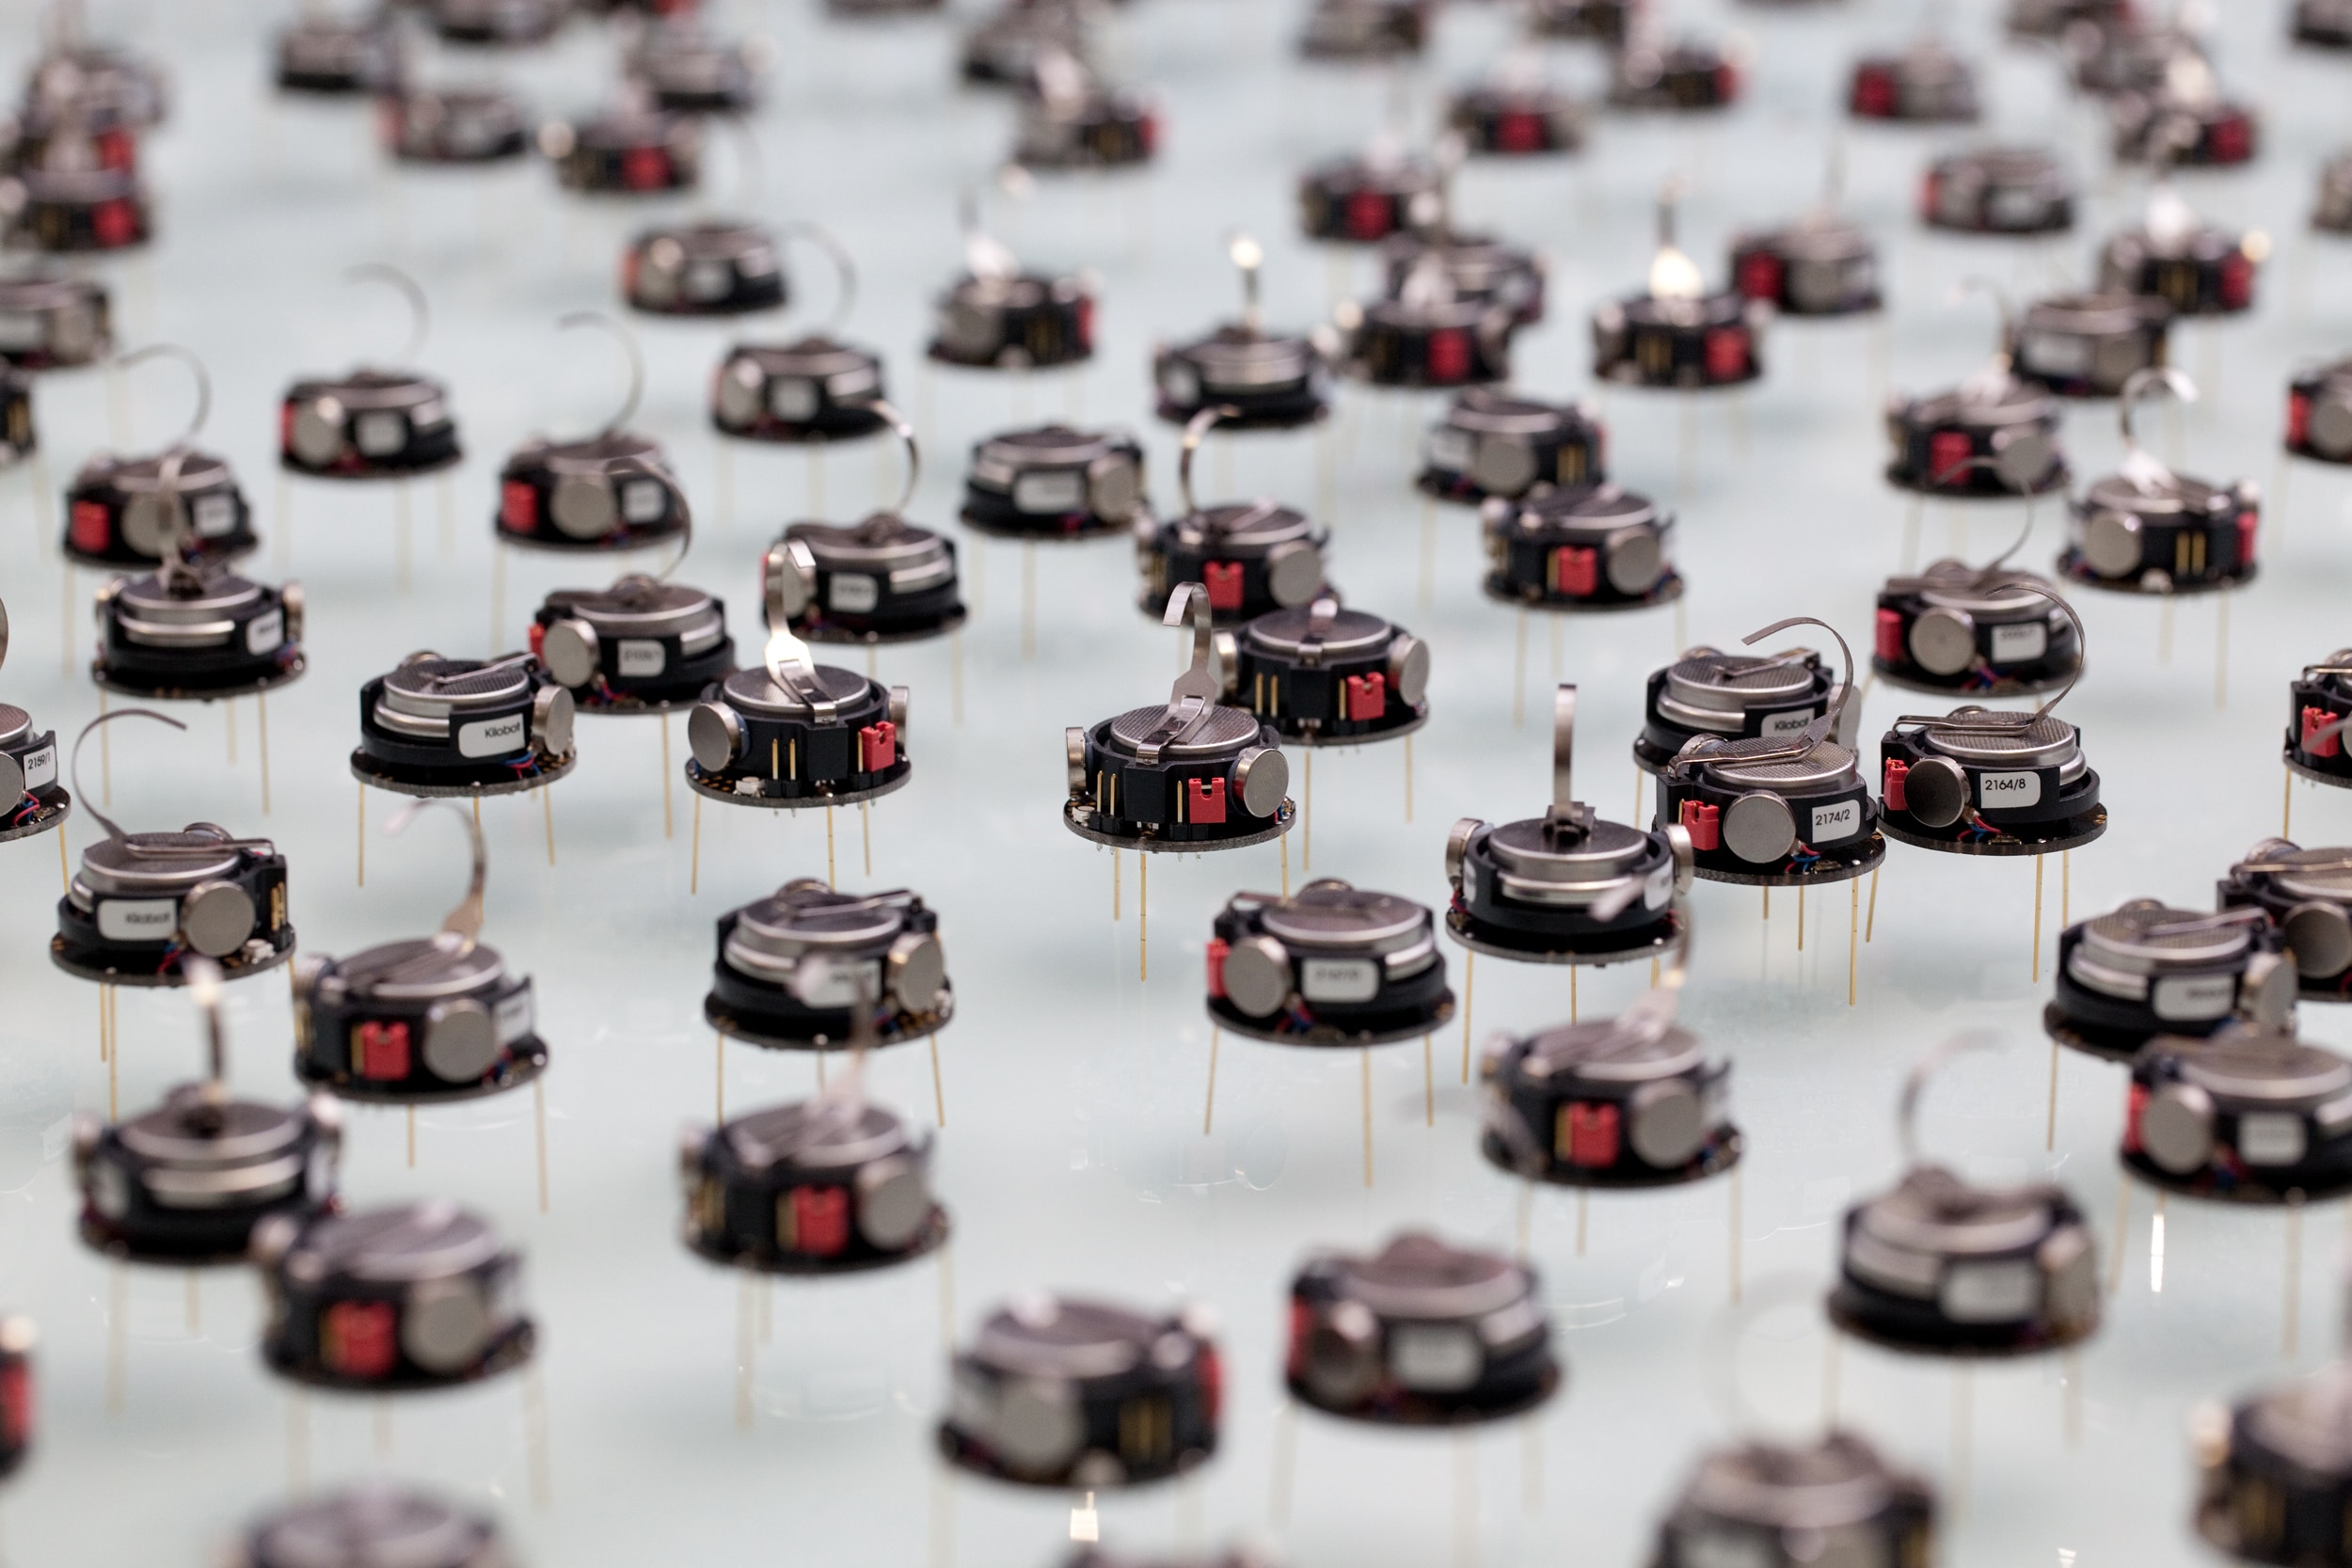 / The social animals are inspiring new behaviors for robot swarms